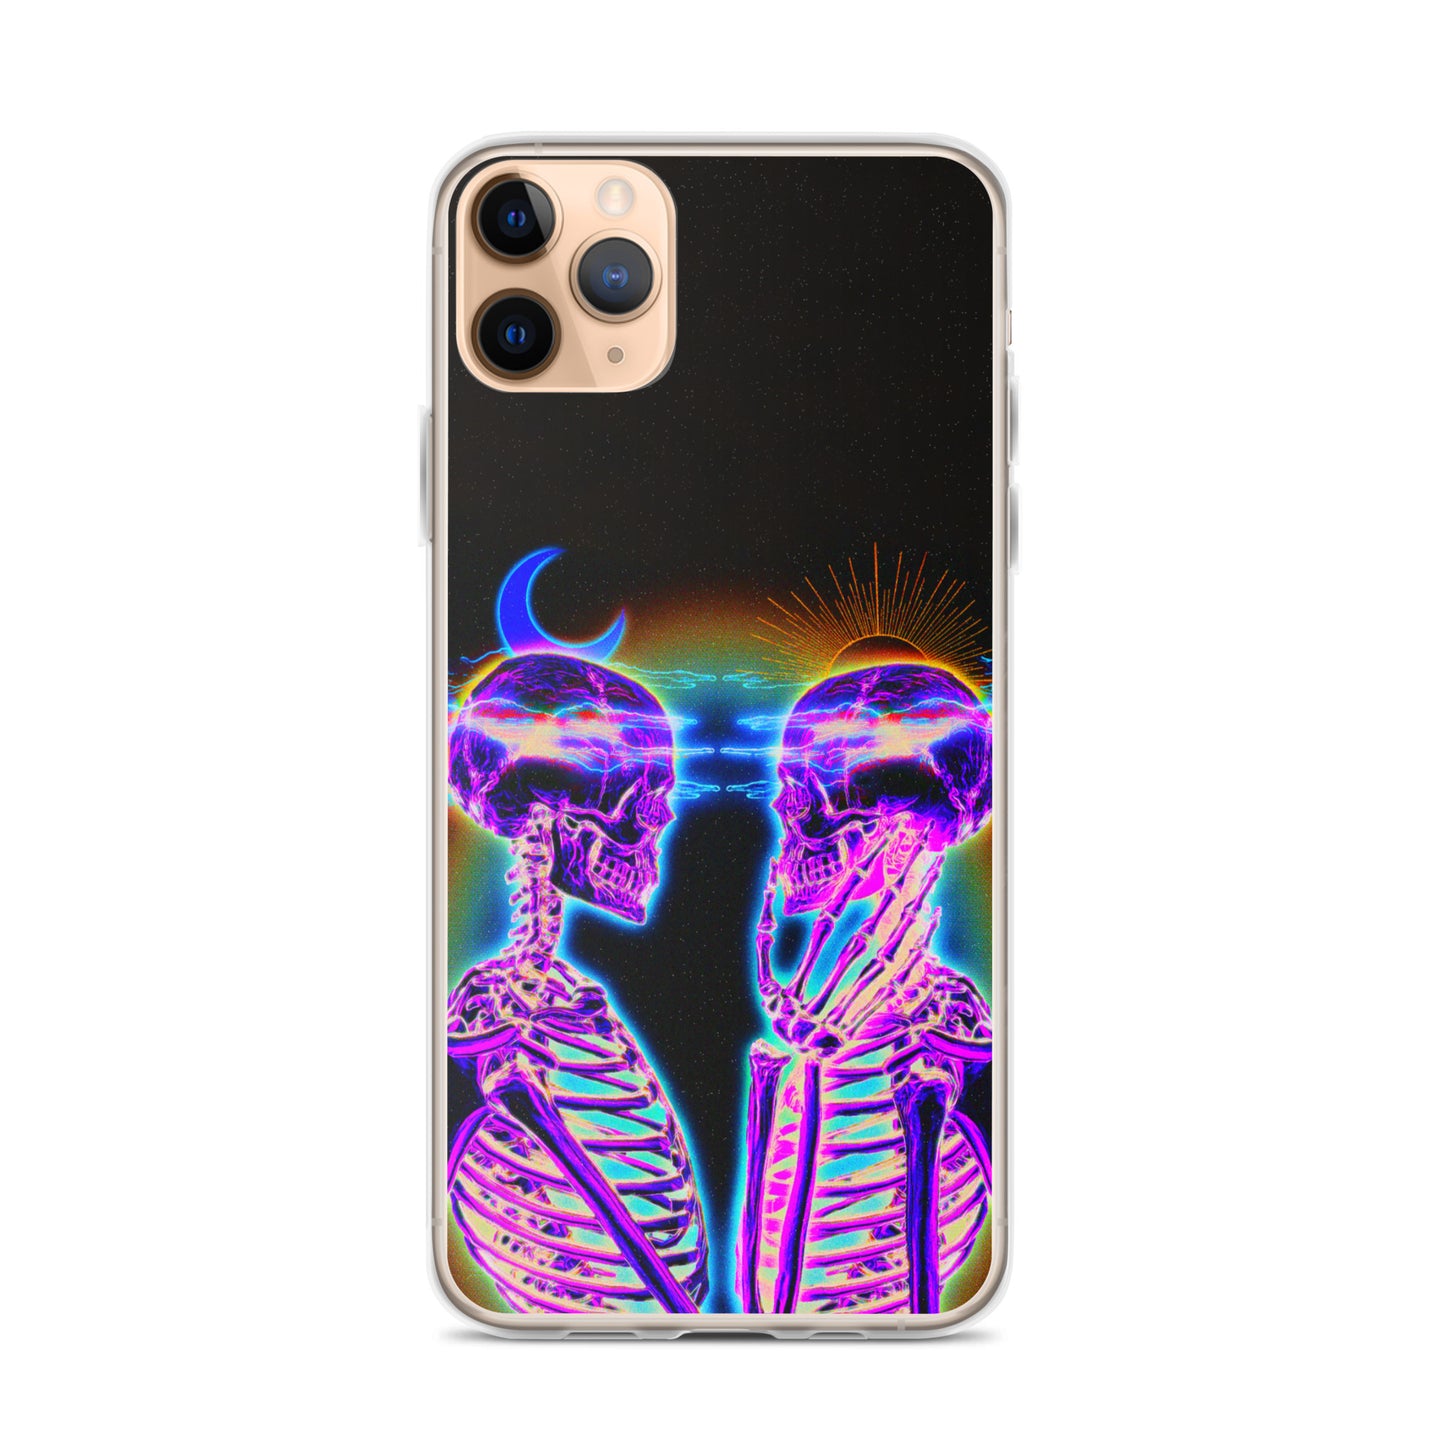 'dawn to dusk' iPhone case